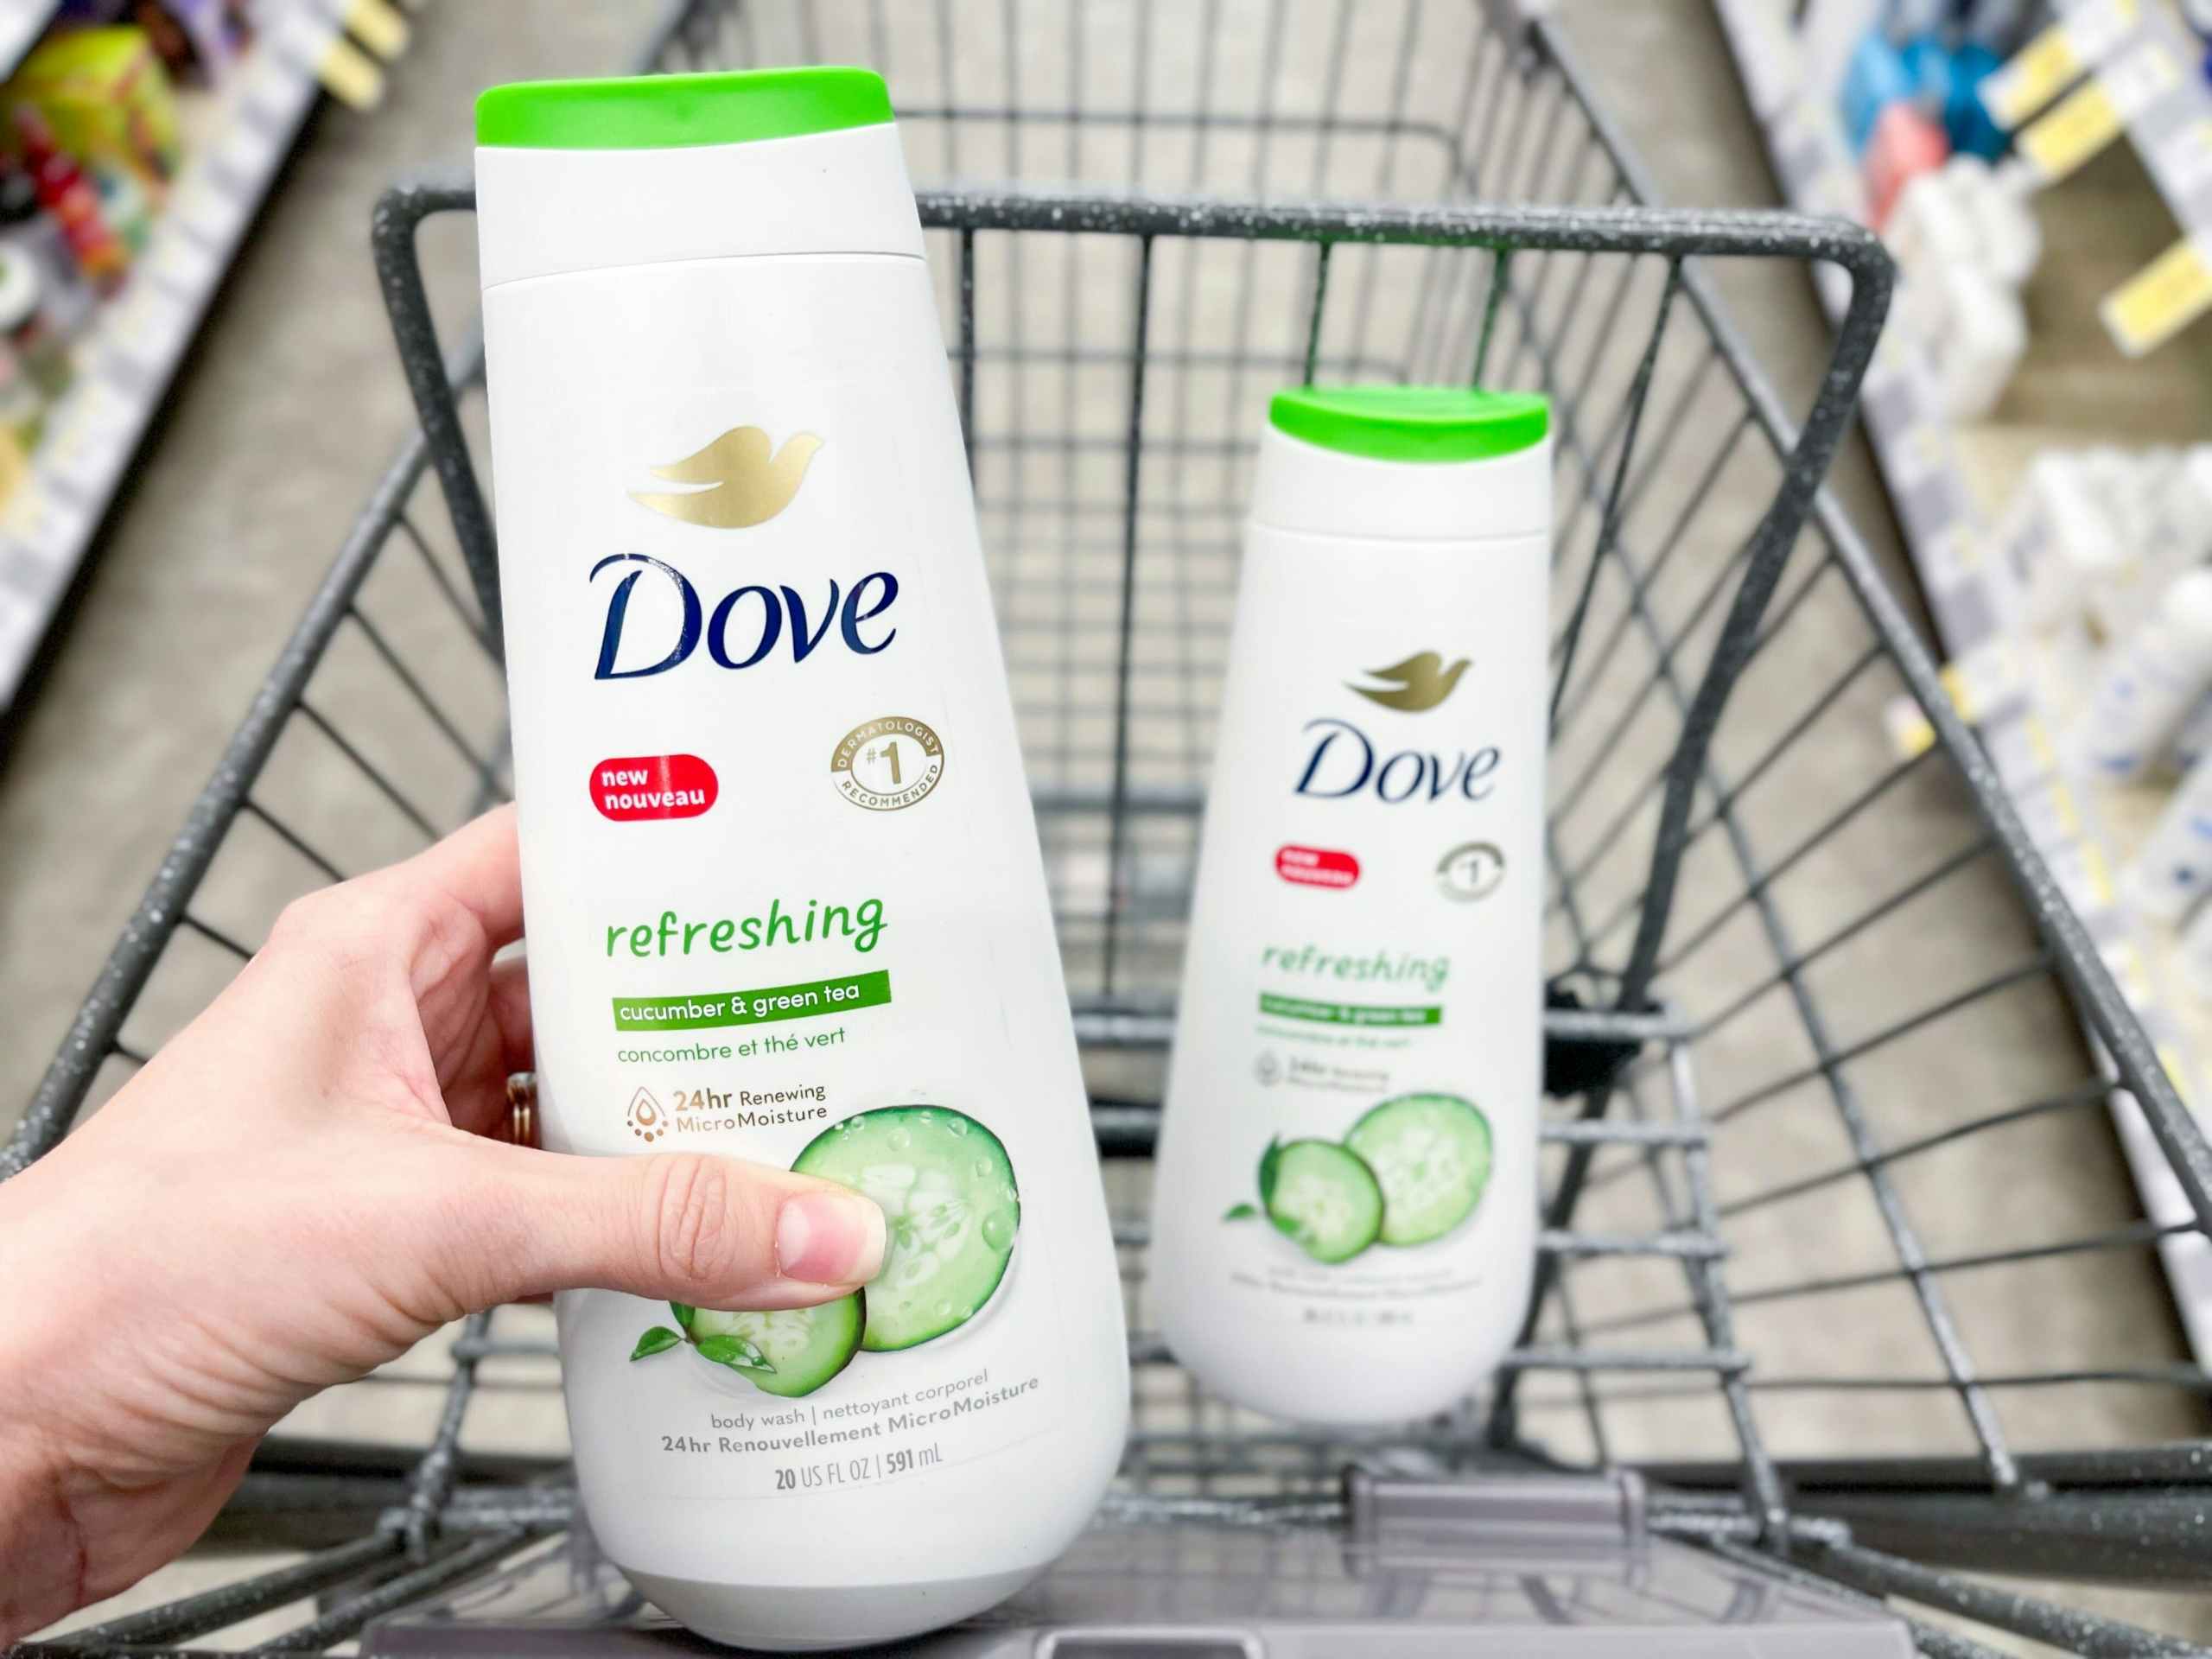 two bottles of dove body wash in shopping cart